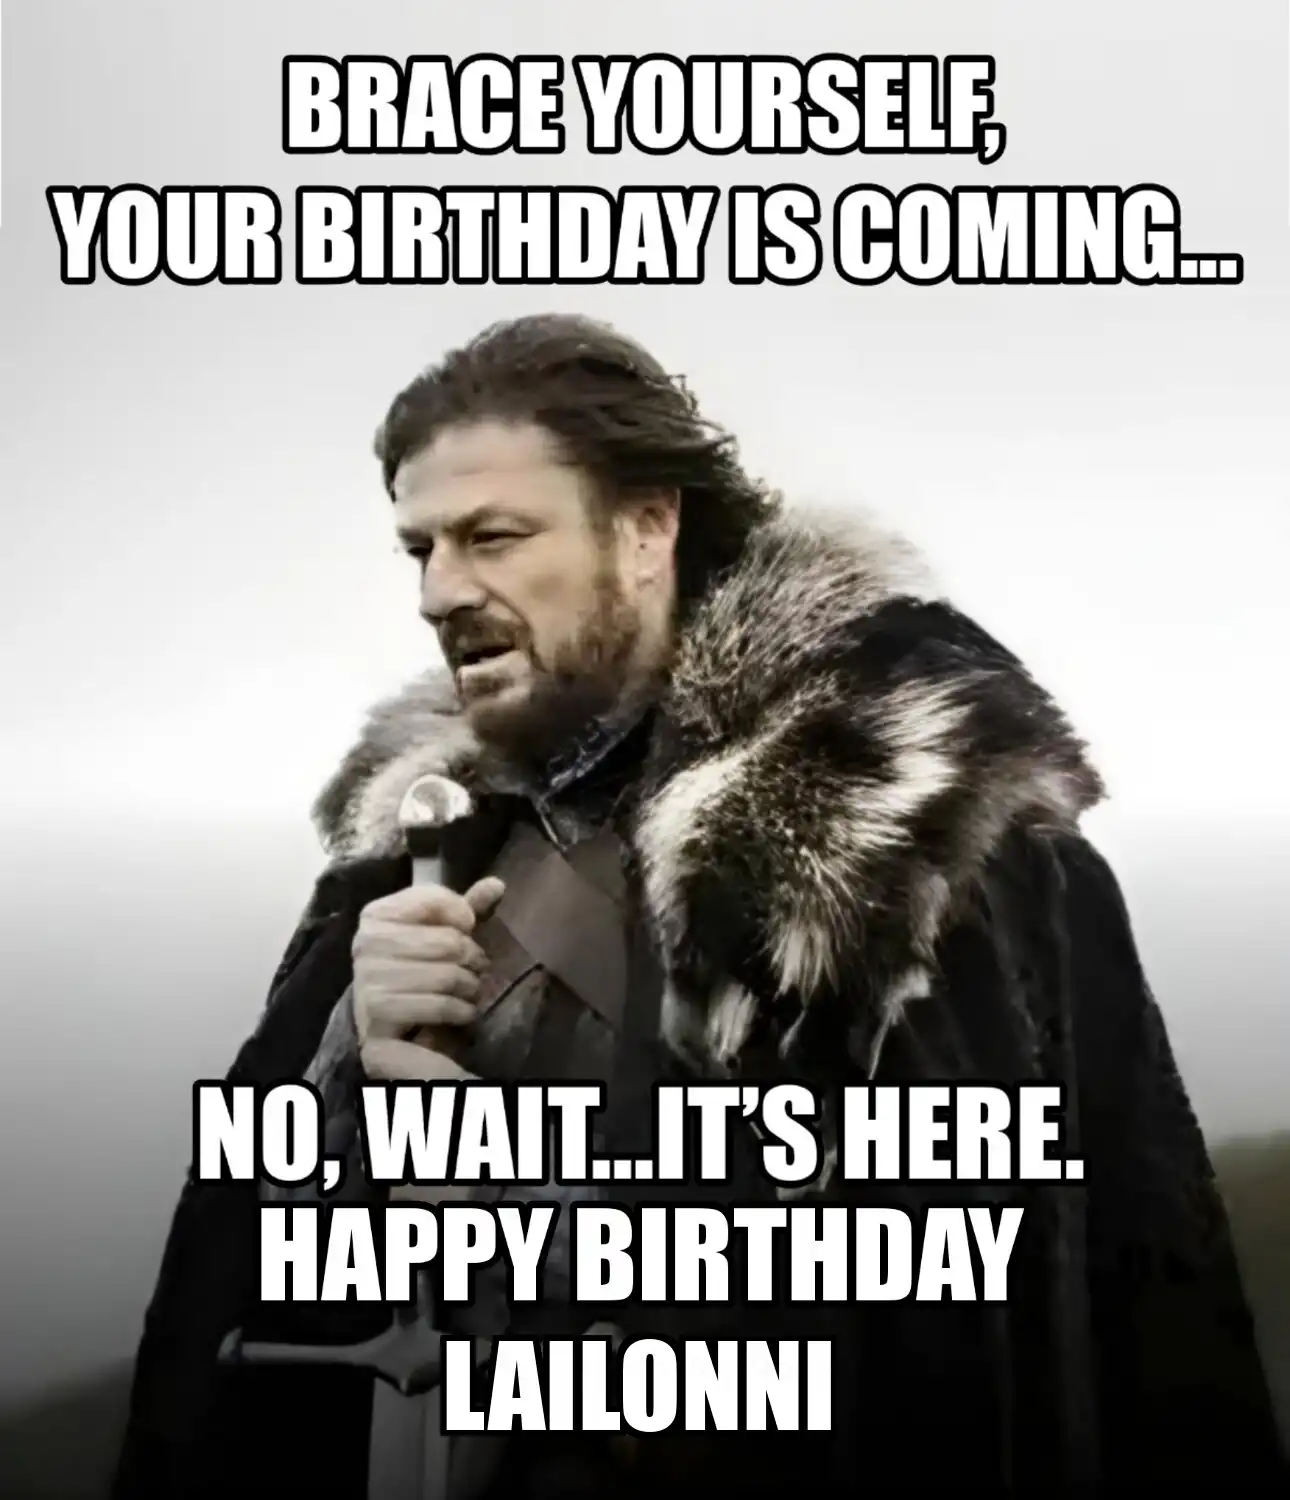 Happy Birthday Lailonni Brace Yourself Your Birthday Is Coming Meme